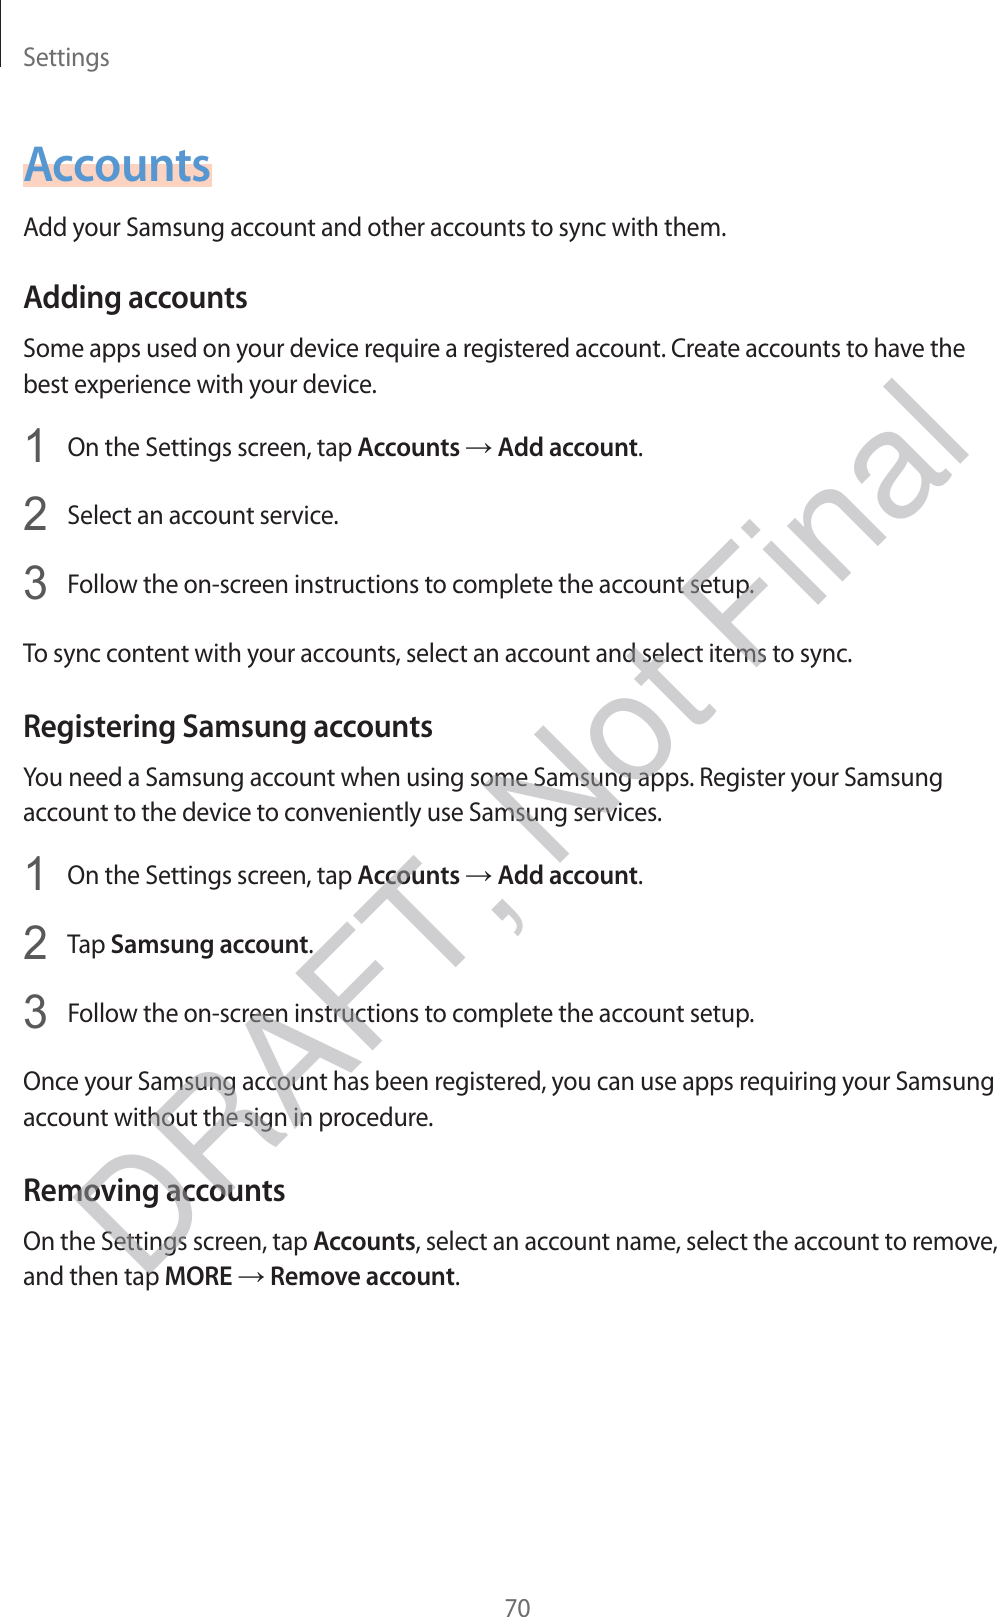 Settings70AccountsAdd your Samsung account and other accounts to sync with them.Adding accountsSome apps used on your device require a registered account. Create accounts to have the best experience with your device.1 On the Settings screen, tap Accounts → Add account.2 Select an account service.3 Follow the on-screen instructions to complete the account setup.To sync content with your accounts, select an account and select items to sync.Registering Samsung accountsYou need a Samsung account when using some Samsung apps. Register your Samsung account to the device to conveniently use Samsung services.1 On the Settings screen, tap Accounts → Add account.2 Tap Samsung account.3 Follow the on-screen instructions to complete the account setup.Once your Samsung account has been registered, you can use apps requiring your Samsung account without the sign in procedure.Removing accountsOn the Settings screen, tap Accounts, select an account name, select the account to remove, and then tap MORE → Remove account.DRAFT, Not Final